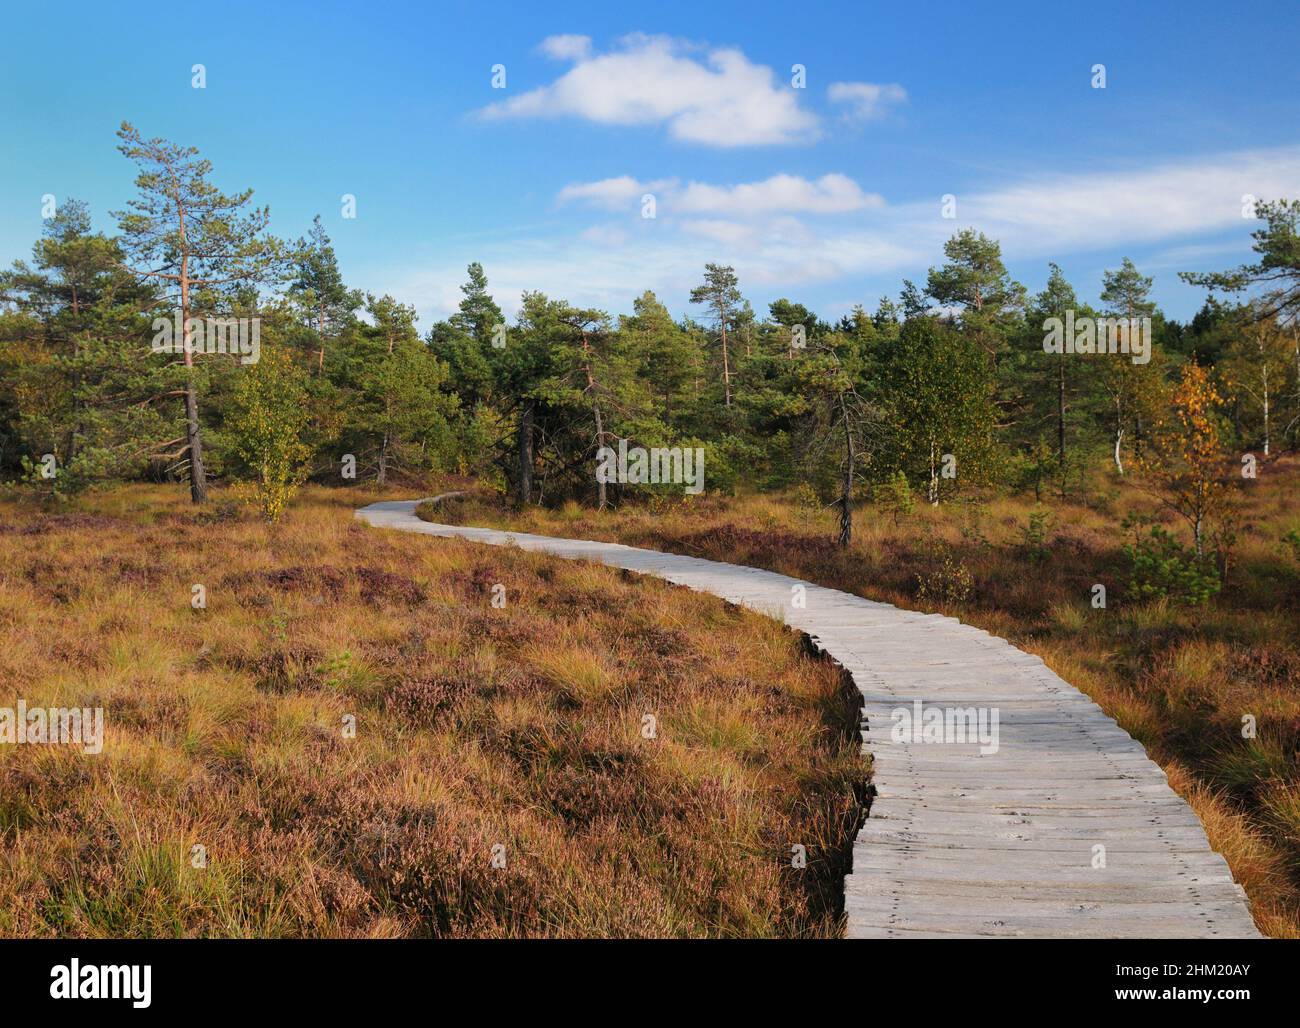 Wooden Boardwalk Winding Through The Black Moor In The Rhoen Mountains Germany On A Beautiful Sunny Autumn Day With A Clear Blue Sky And A Few Clouds Stock Photo